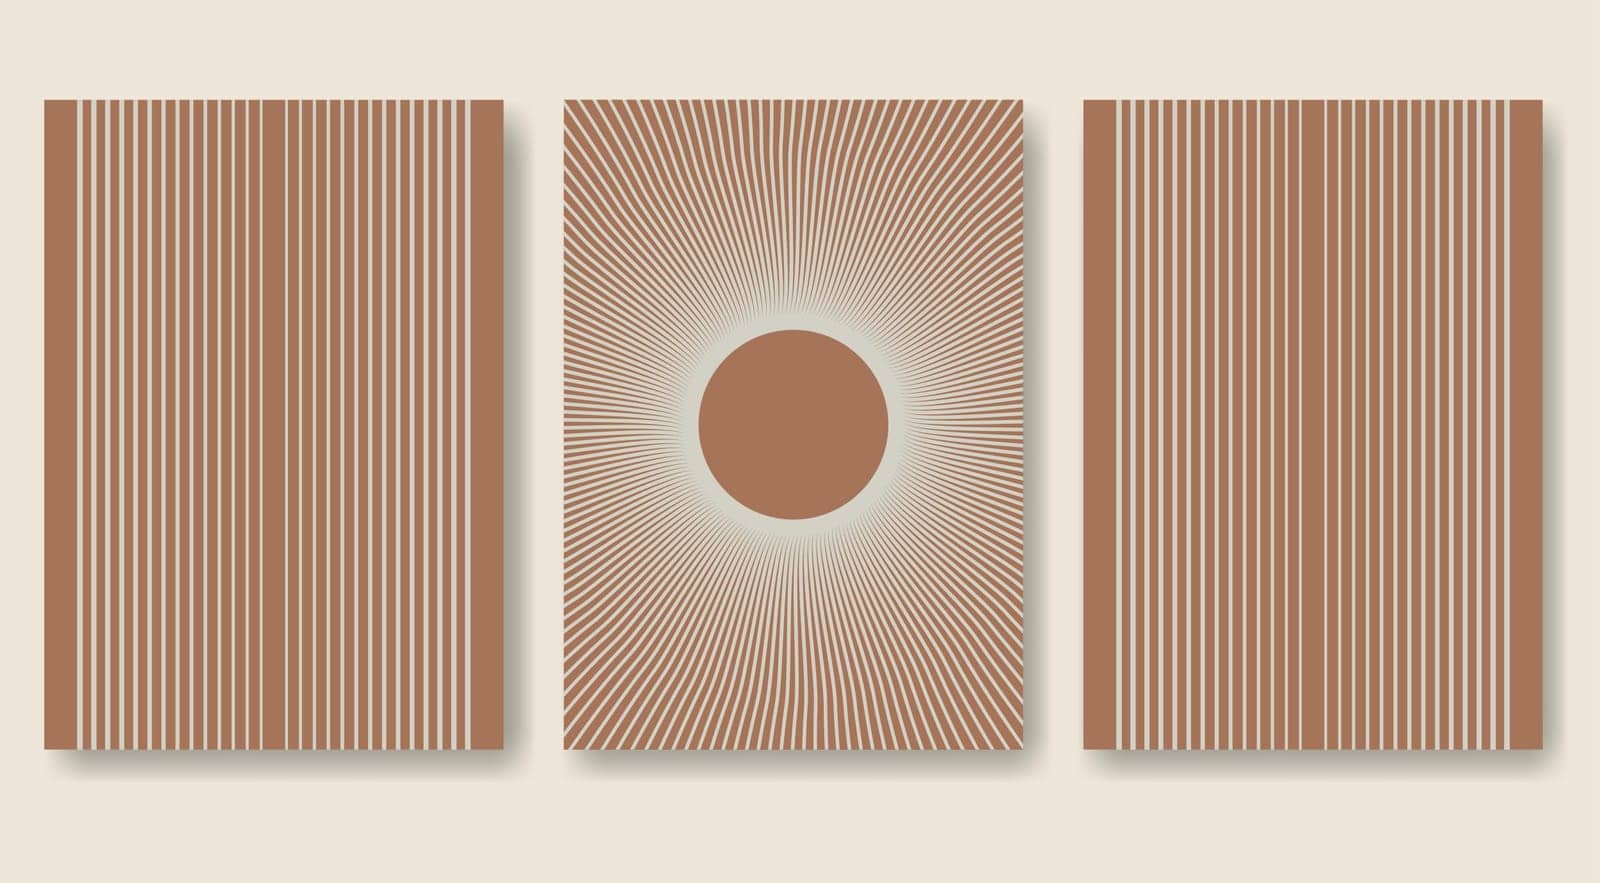 Aesthetic arch and sun brown poster set in minimalistic style. Boho home decor of circles and lines in pastel colors. Wall art illustrations. A4 size